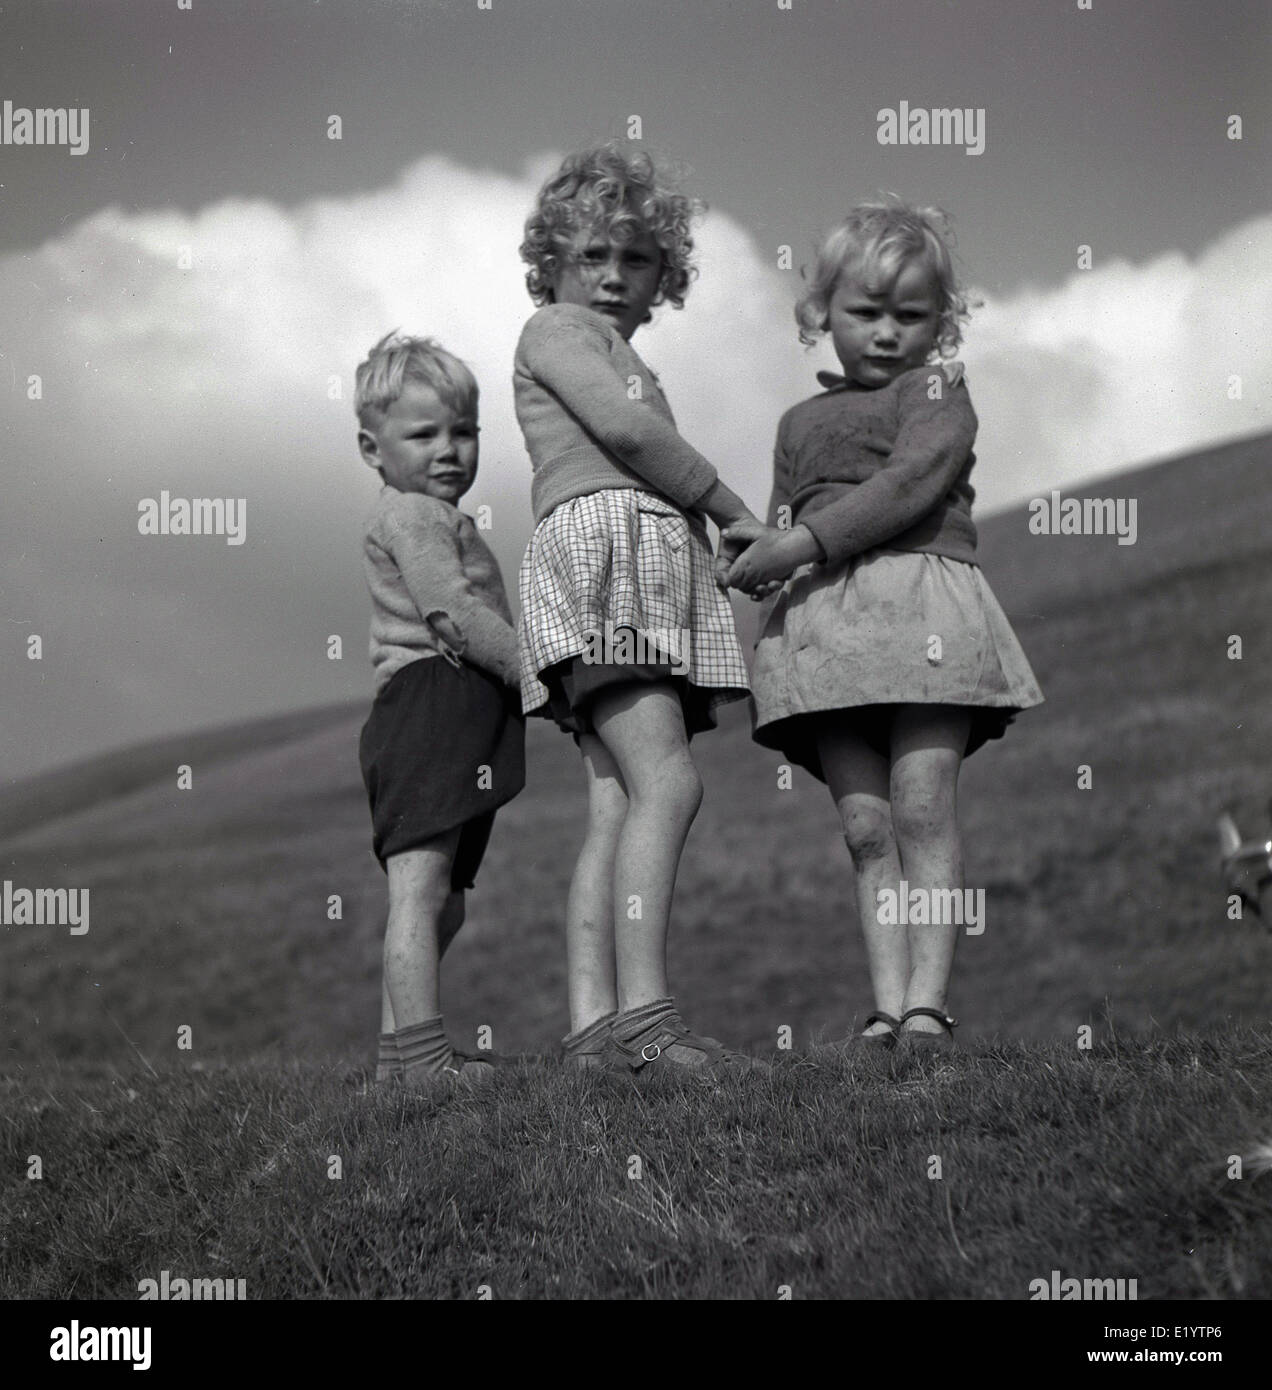 1950s, an historical portrait by J Allan Cash of three young country children standing together on a hillside holding hands. Stock Photo